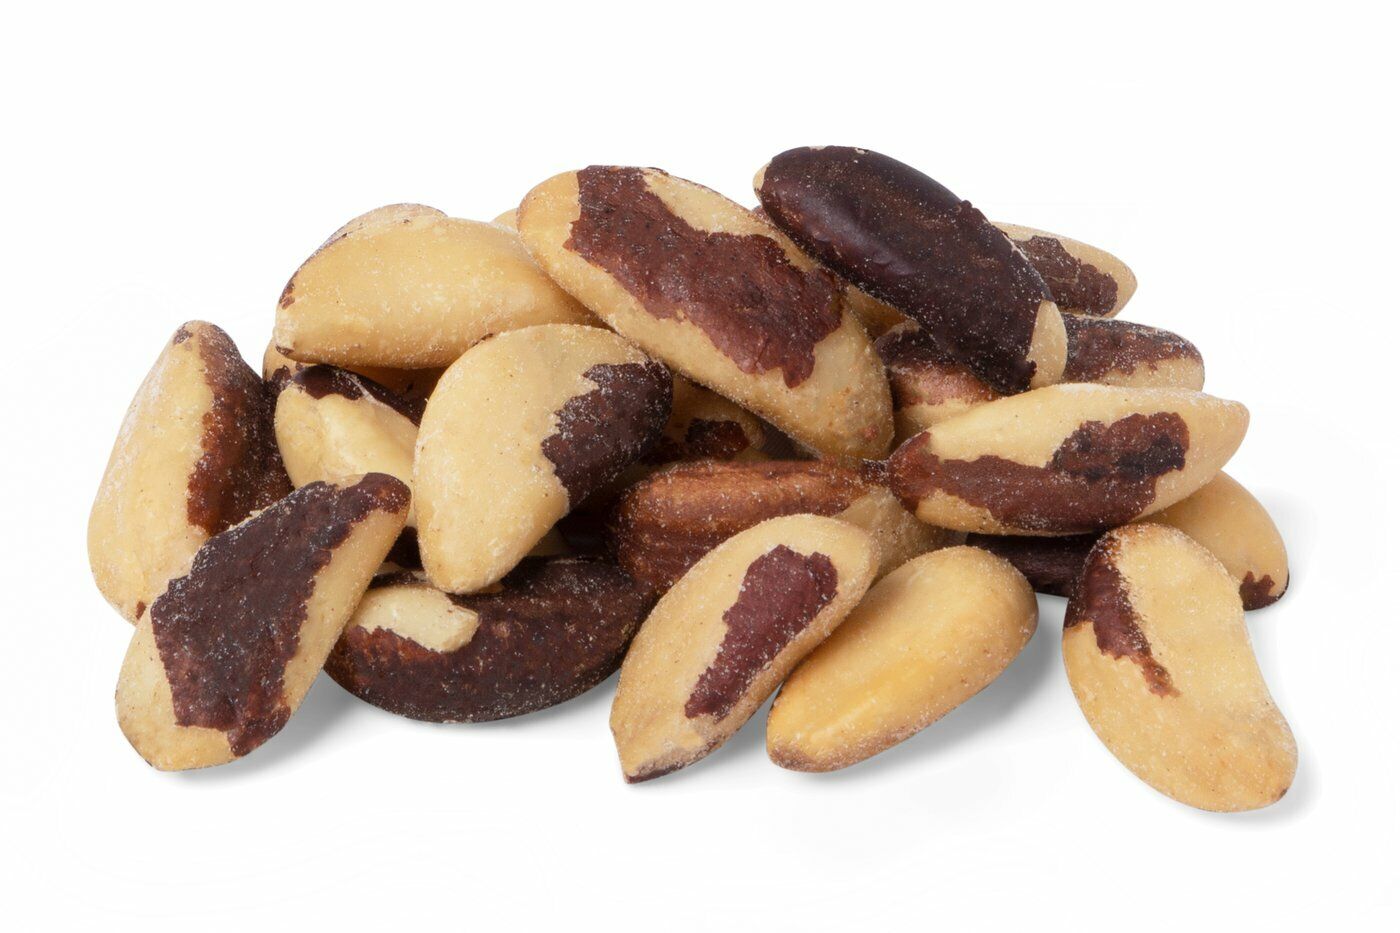 ROASTED BRAZIL NUTS SALTED NO SHELL 1 LB BAG & FREE SHIPPING NUTSTOP